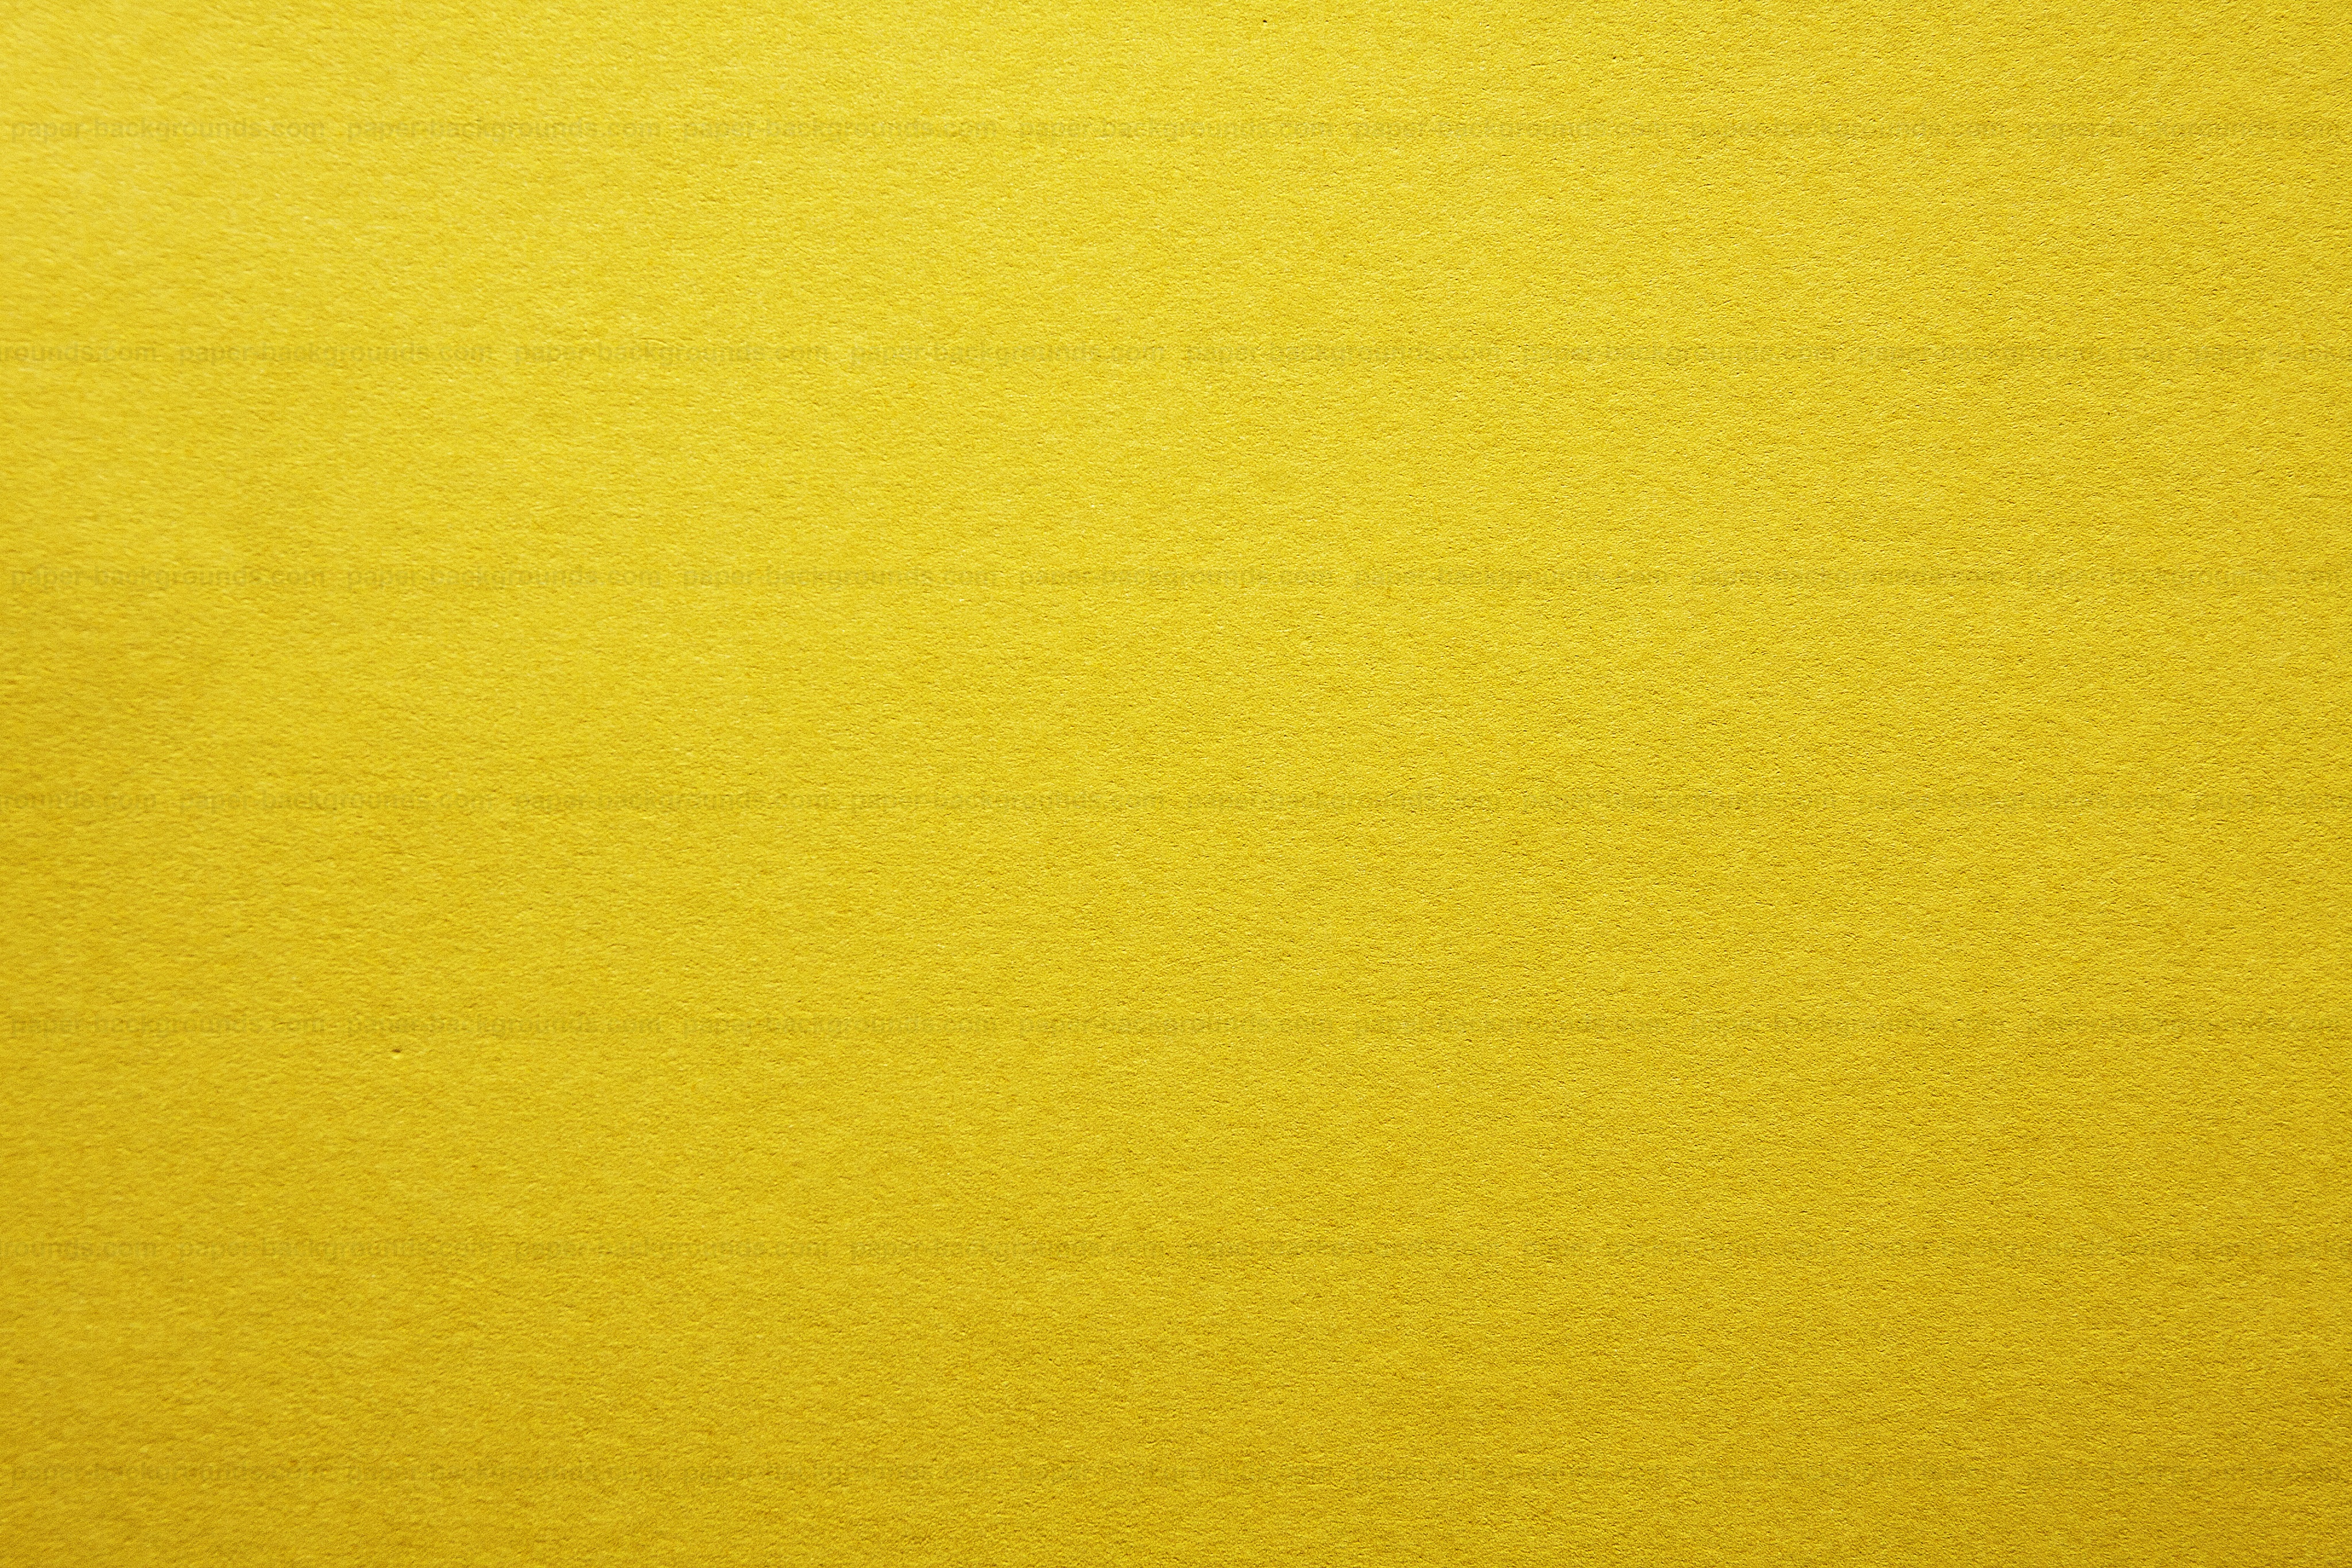 yellow paper textured background Paper Backgrounds